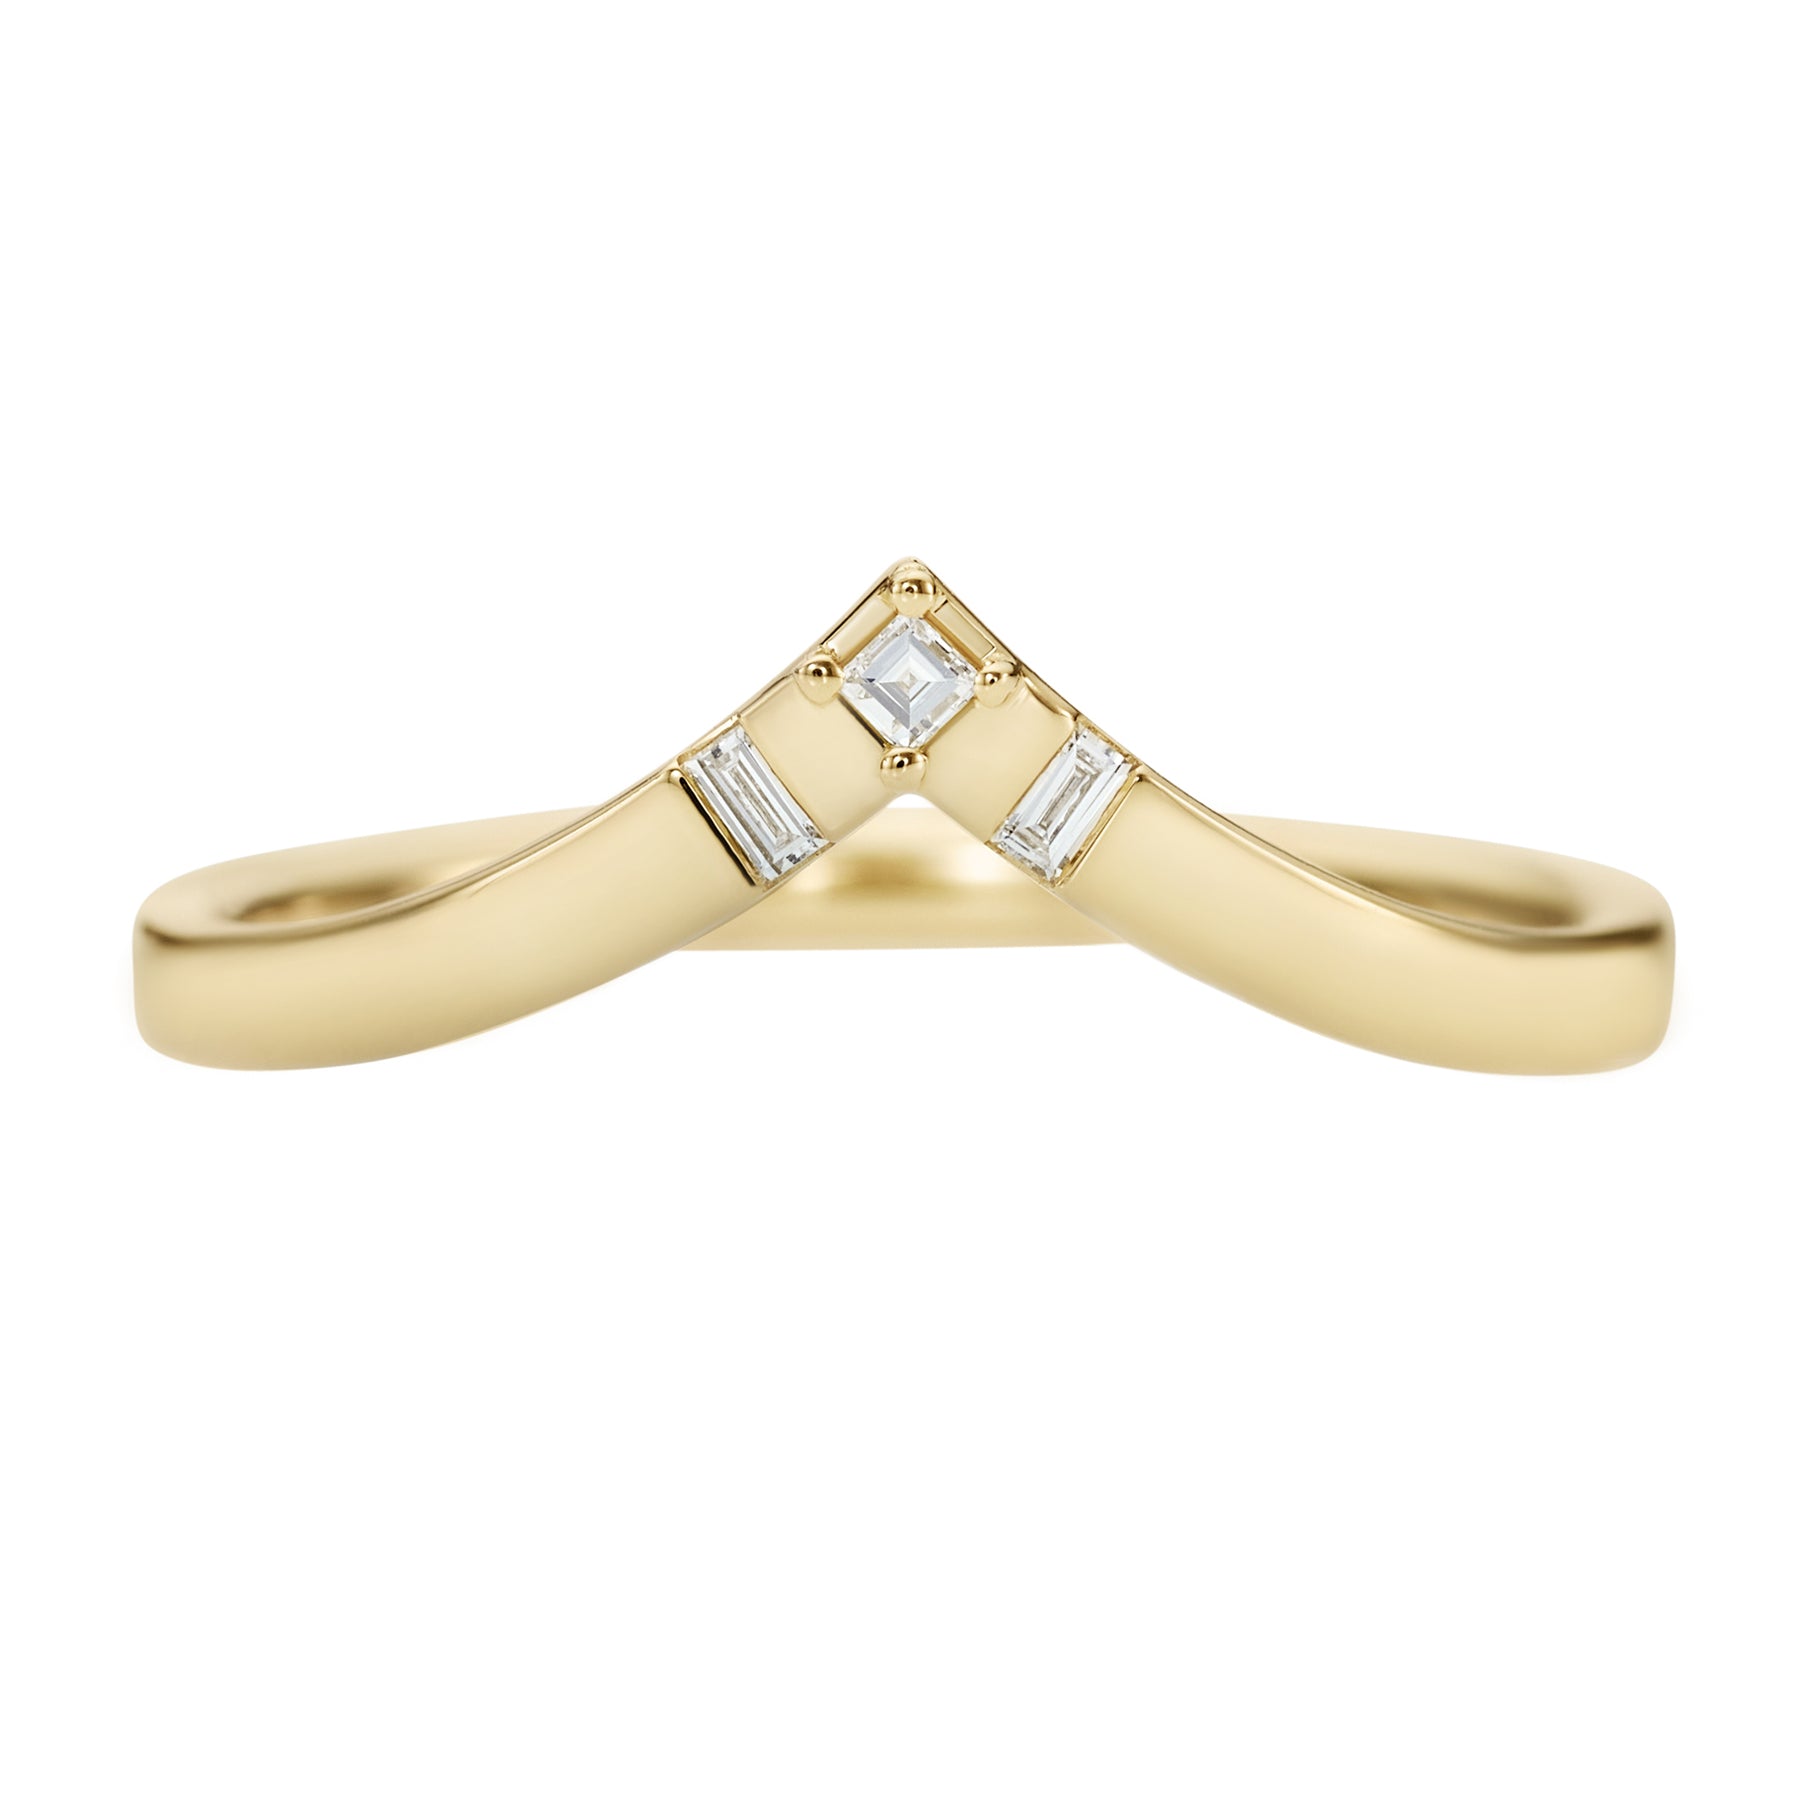 Chevron-Wedding-Ring-with-Baguette-and-Carre-Diamonds-closeup